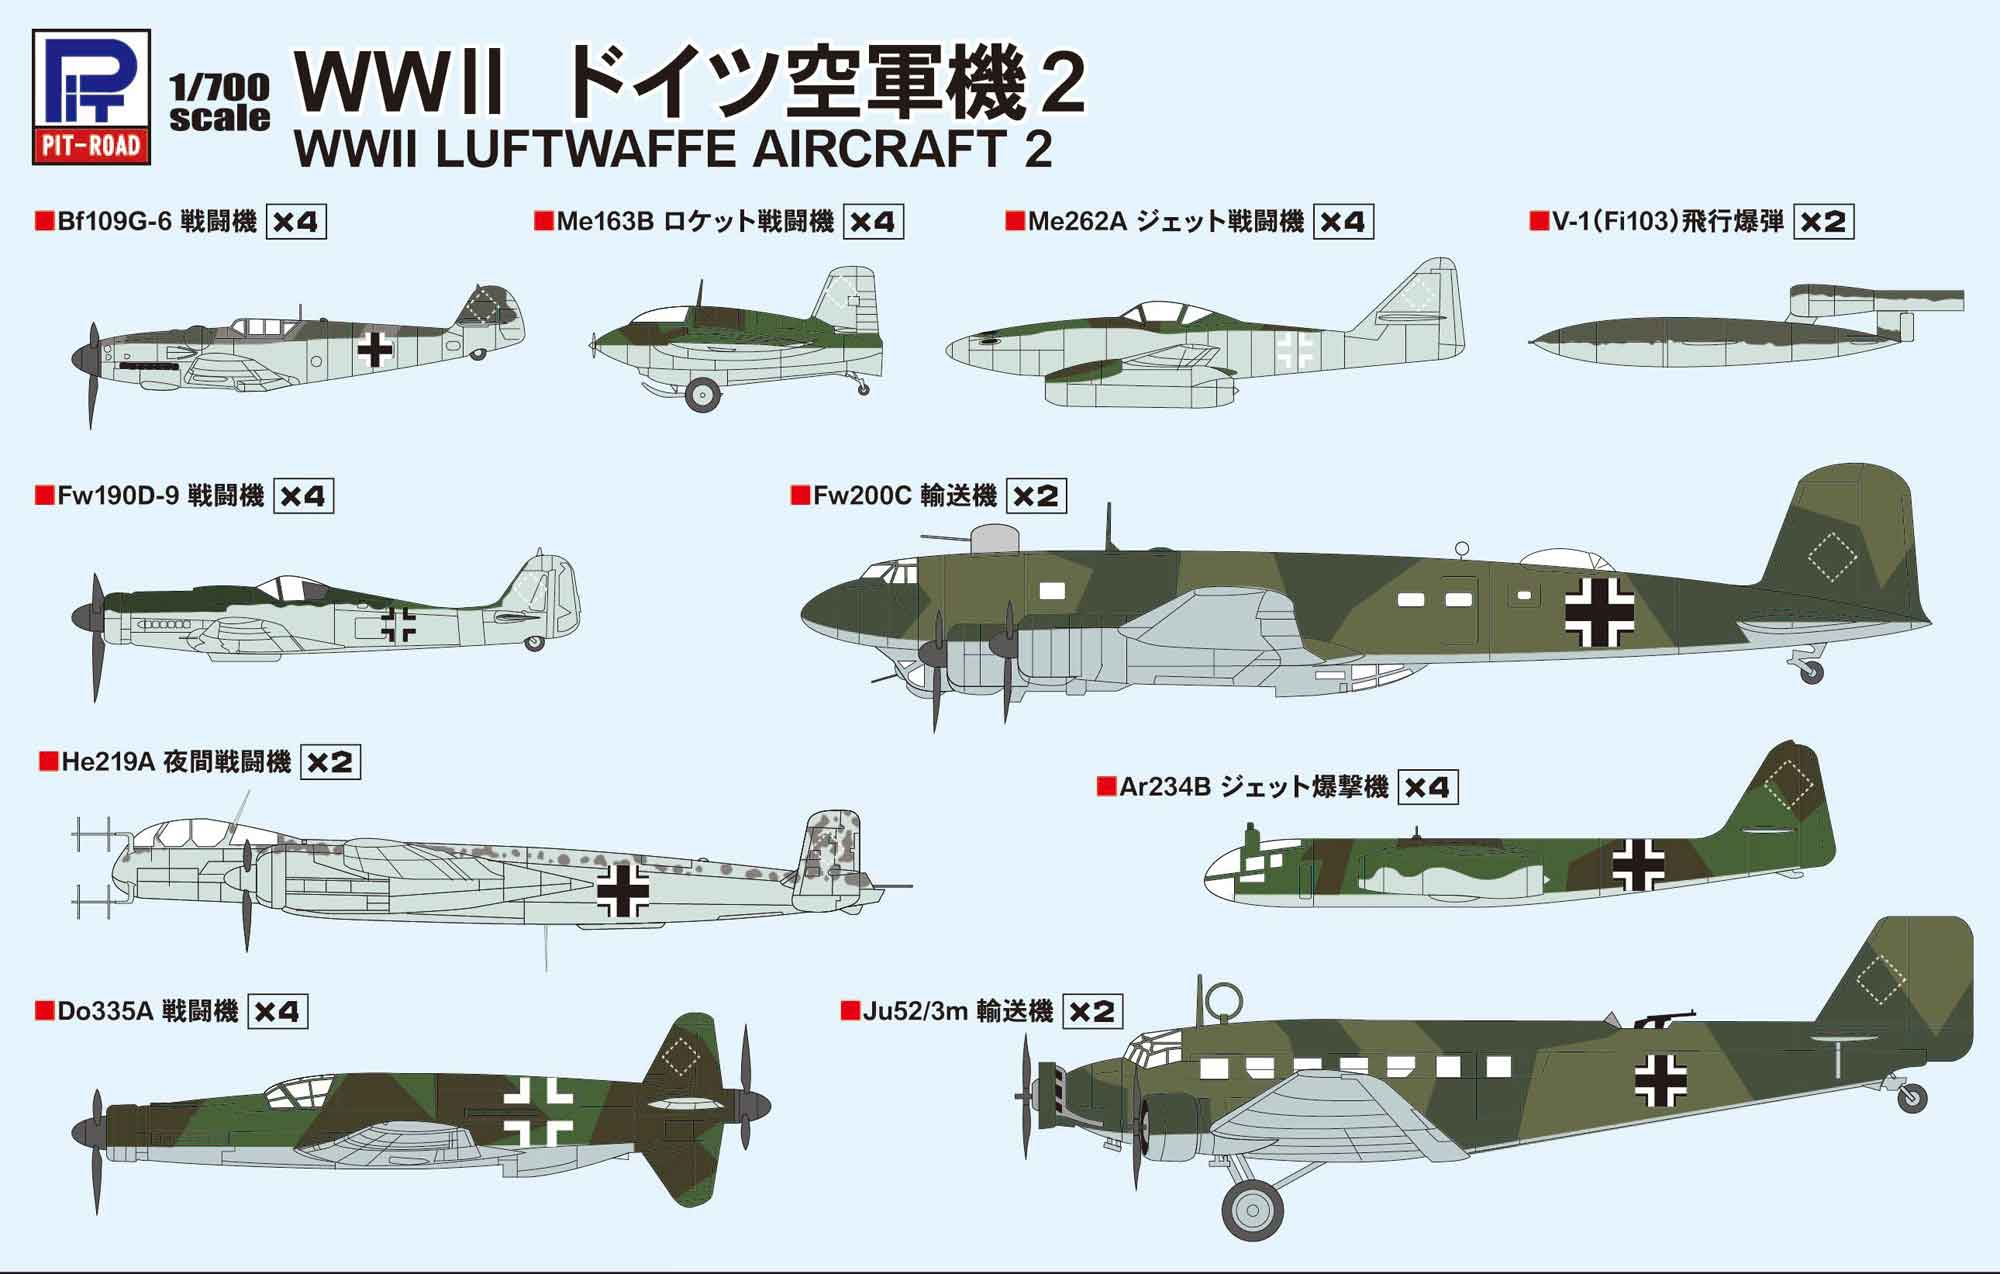 S56 1/700 WWII ドイツ空軍機2